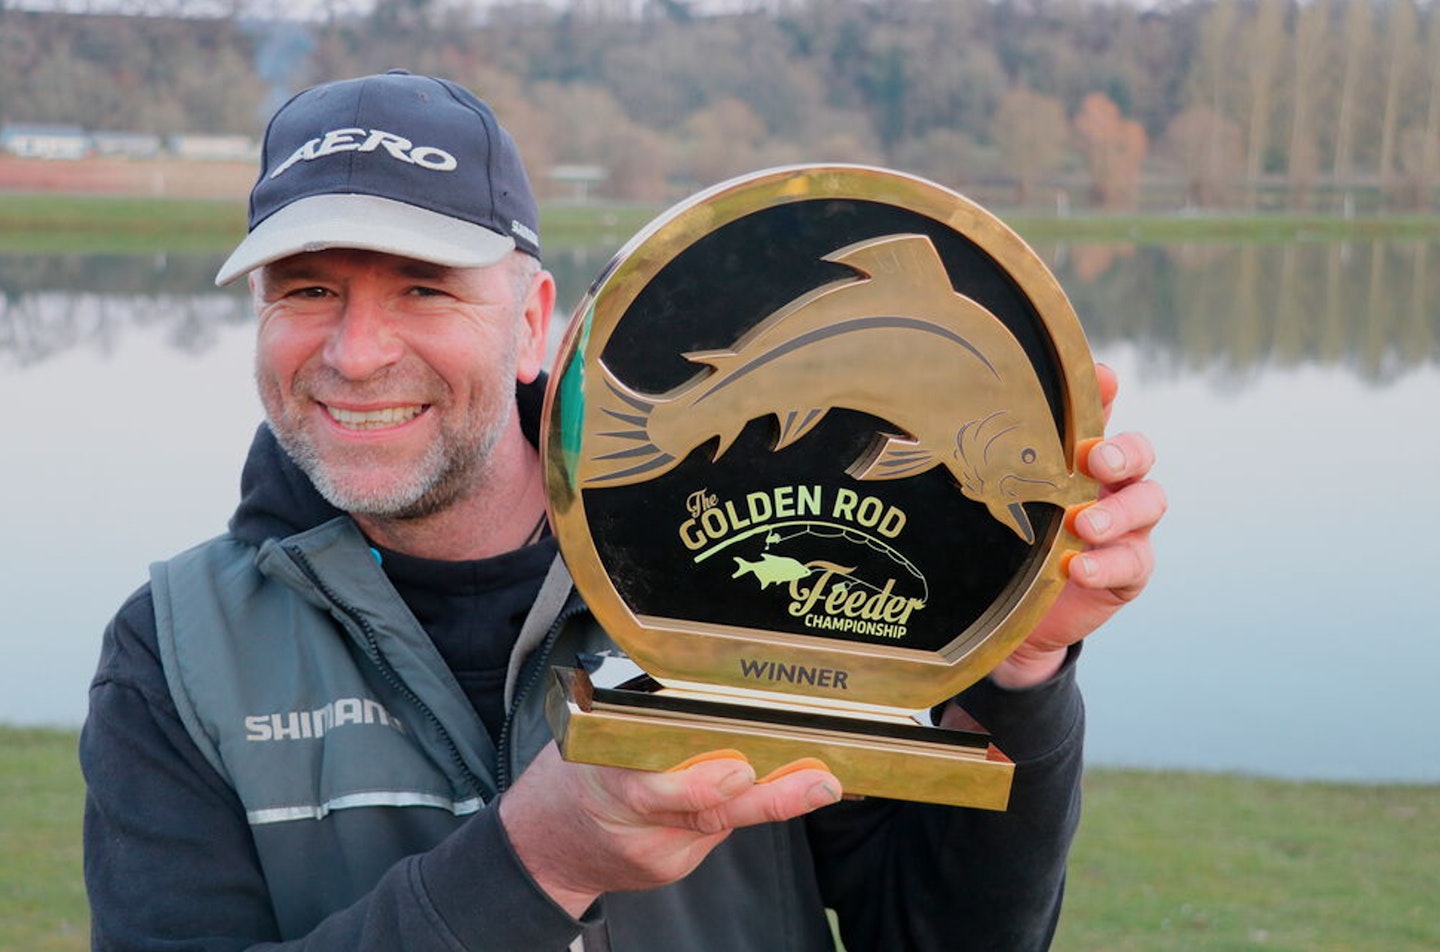 Nick Speed lifted the Golden Rod Angling Champs trophy in a tough final at Larford Lakes